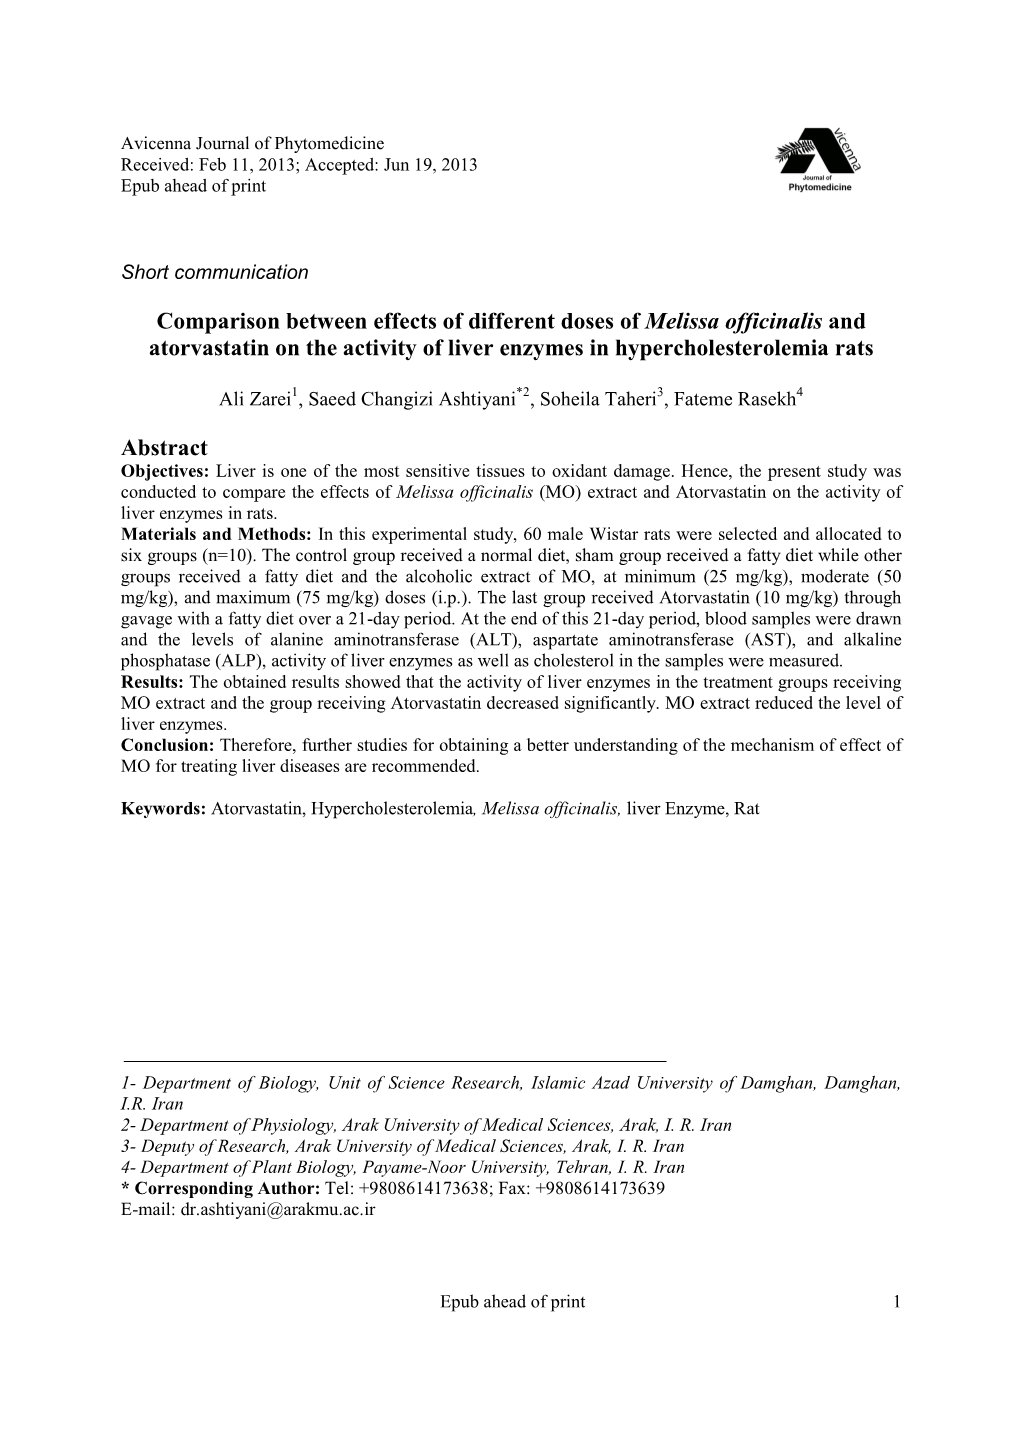 Comparison Between Effects of Different Doses of Melissa Officinalis and Atorvastatin on the Activity of Liver Enzymes in Hypercholesterolemia Rats